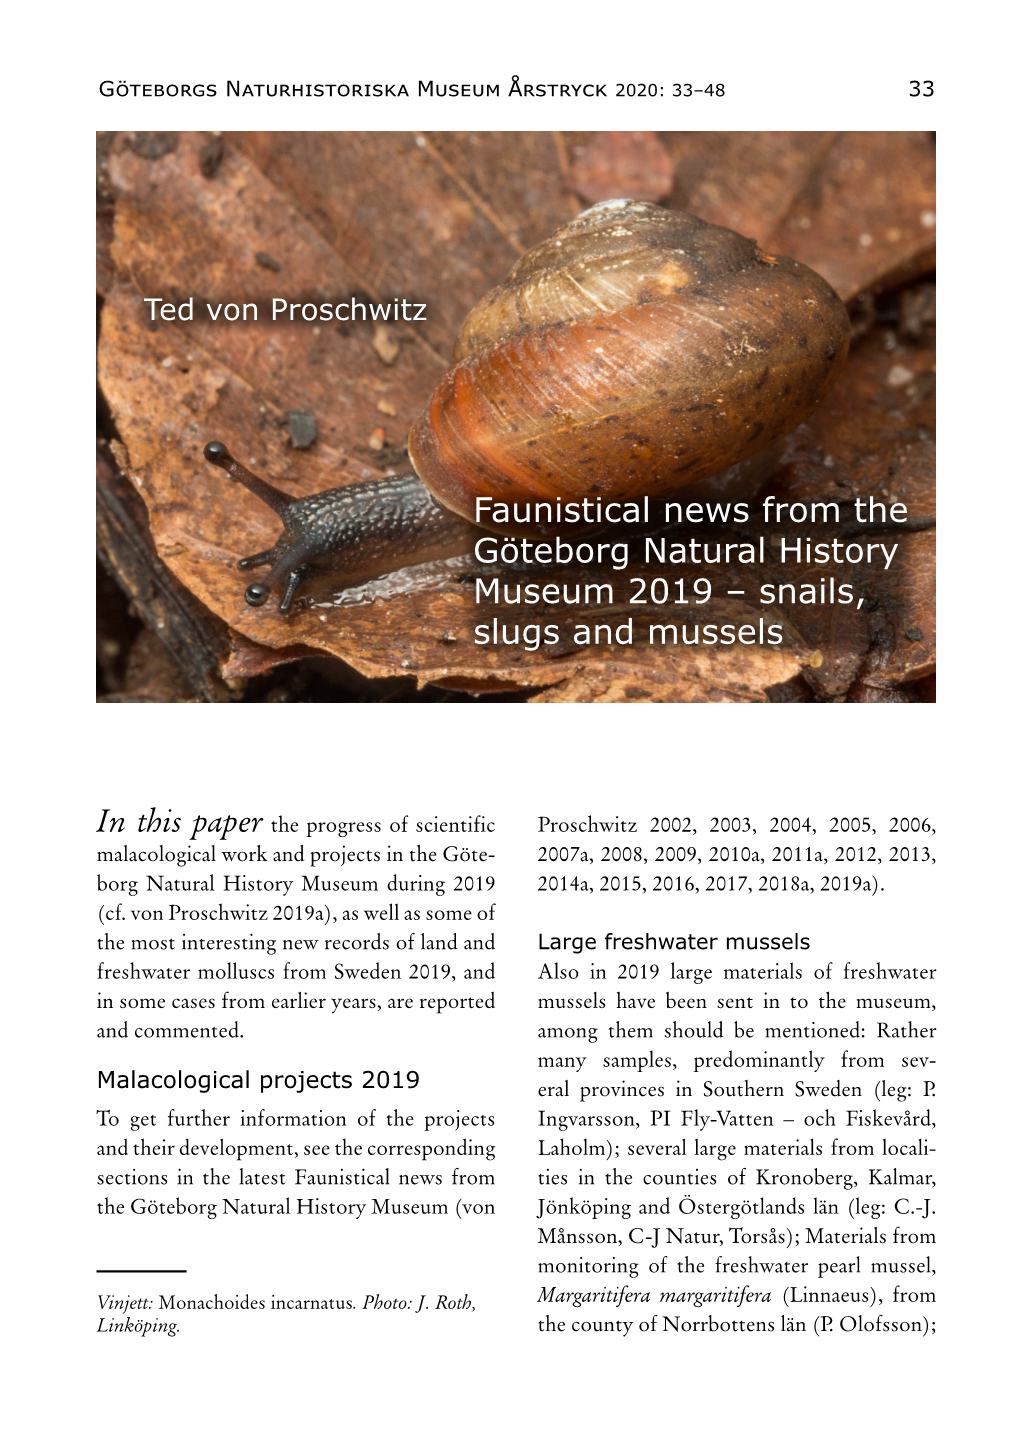 Faunistical News from the Göteborg Natural History Museum 2019 – Snails, Slugs and Mussels